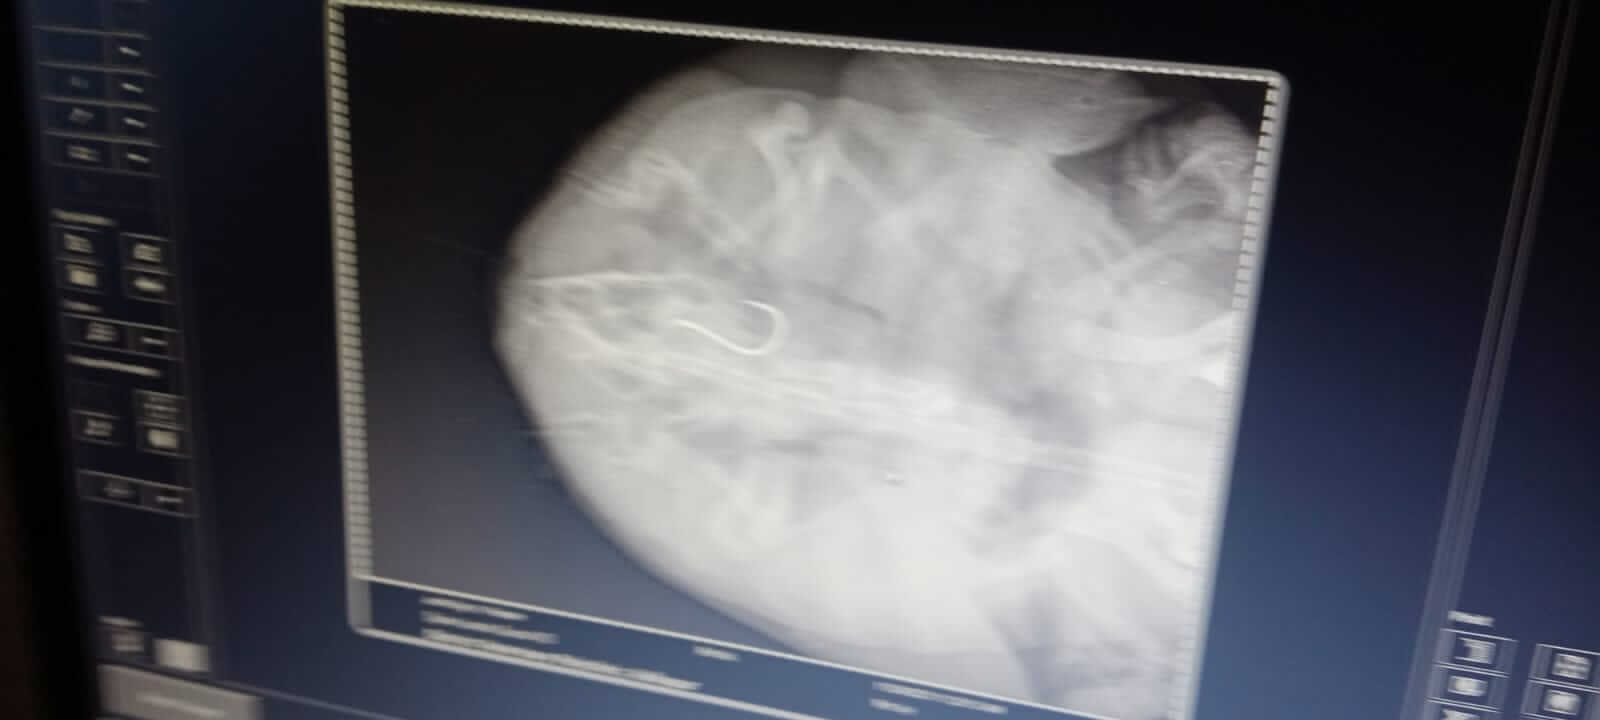 An X-ray image of the turtle’s throat reveals the hook’s exact location.